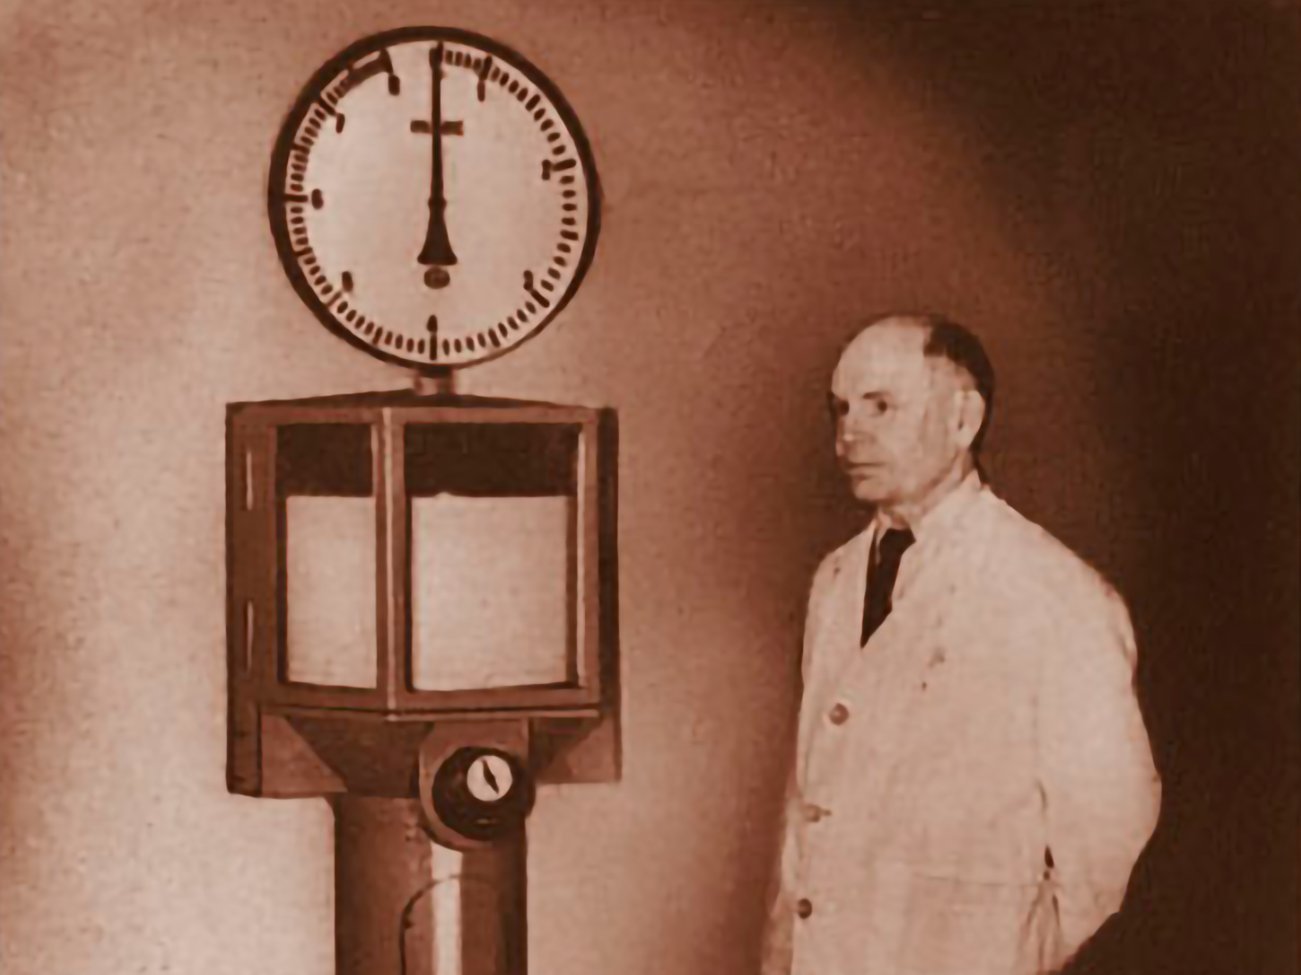 The image shows an old photo of an engineer in front of a mechanical measurement instrument